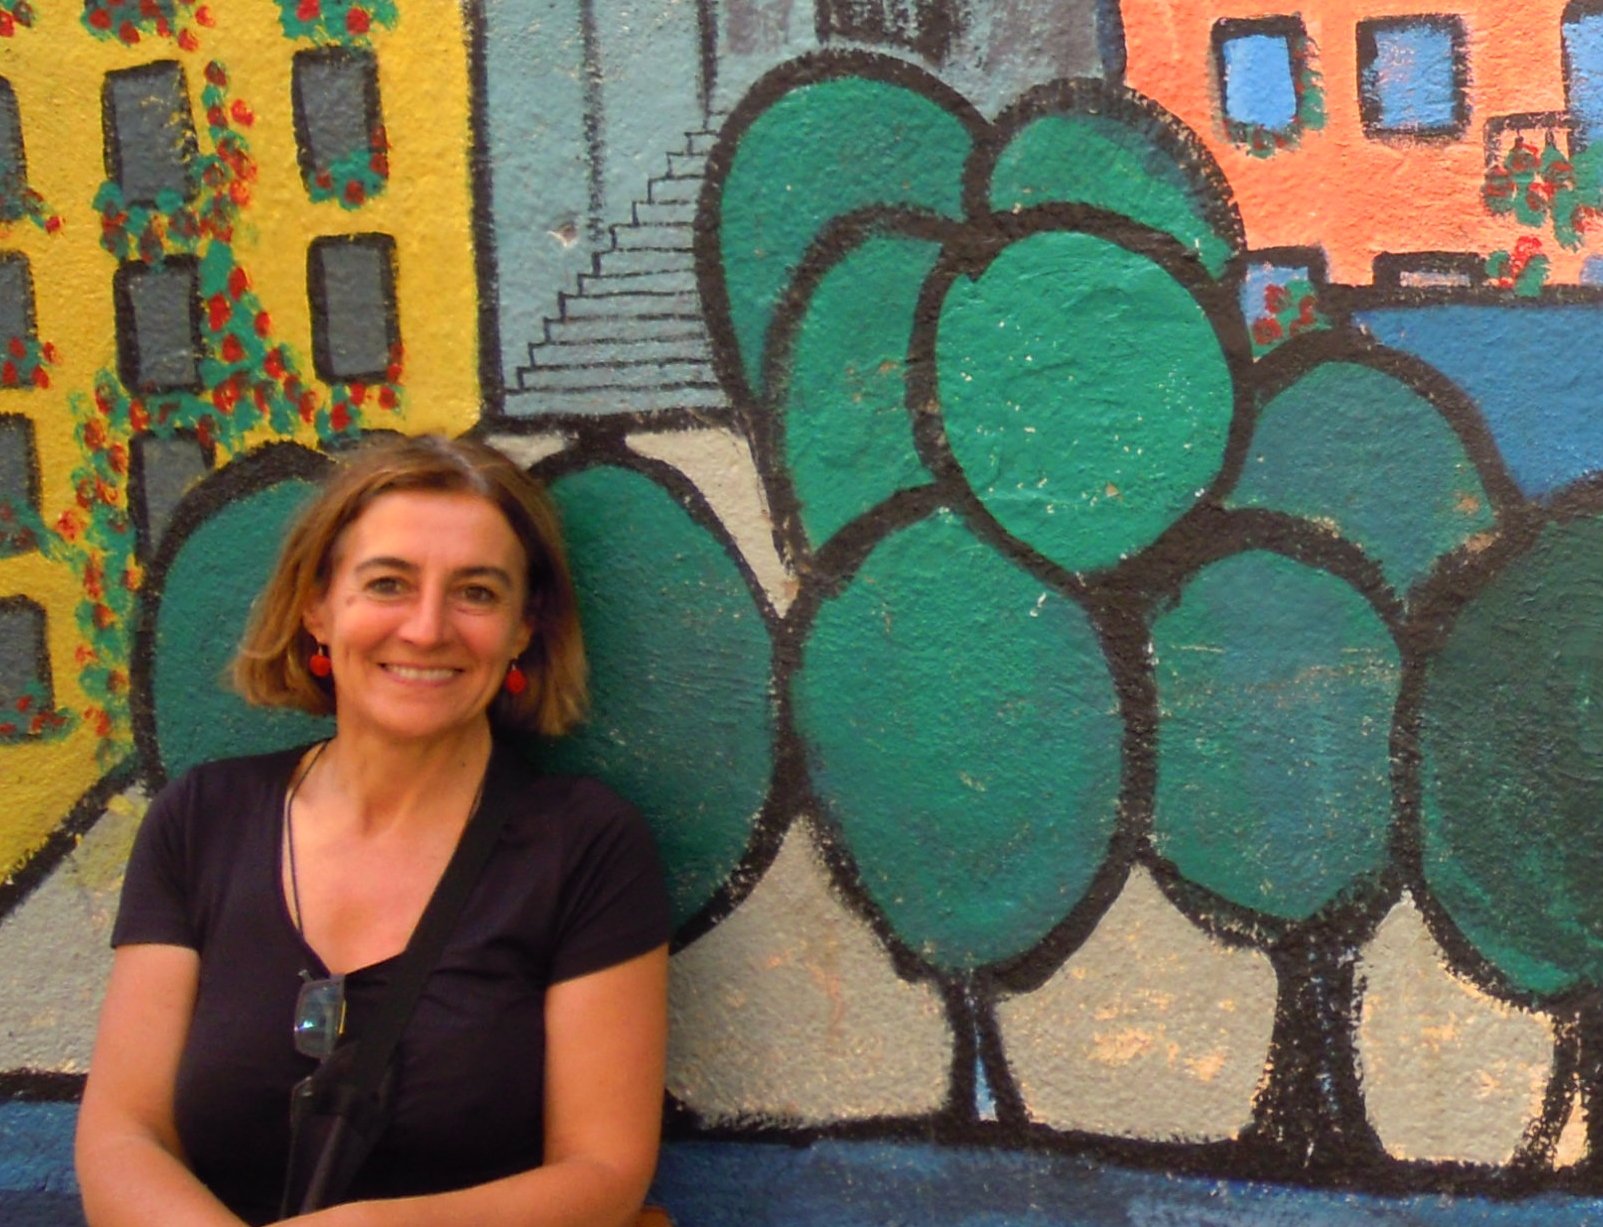 15 Questions with Tiziana, local tour guide in Florence, Italy